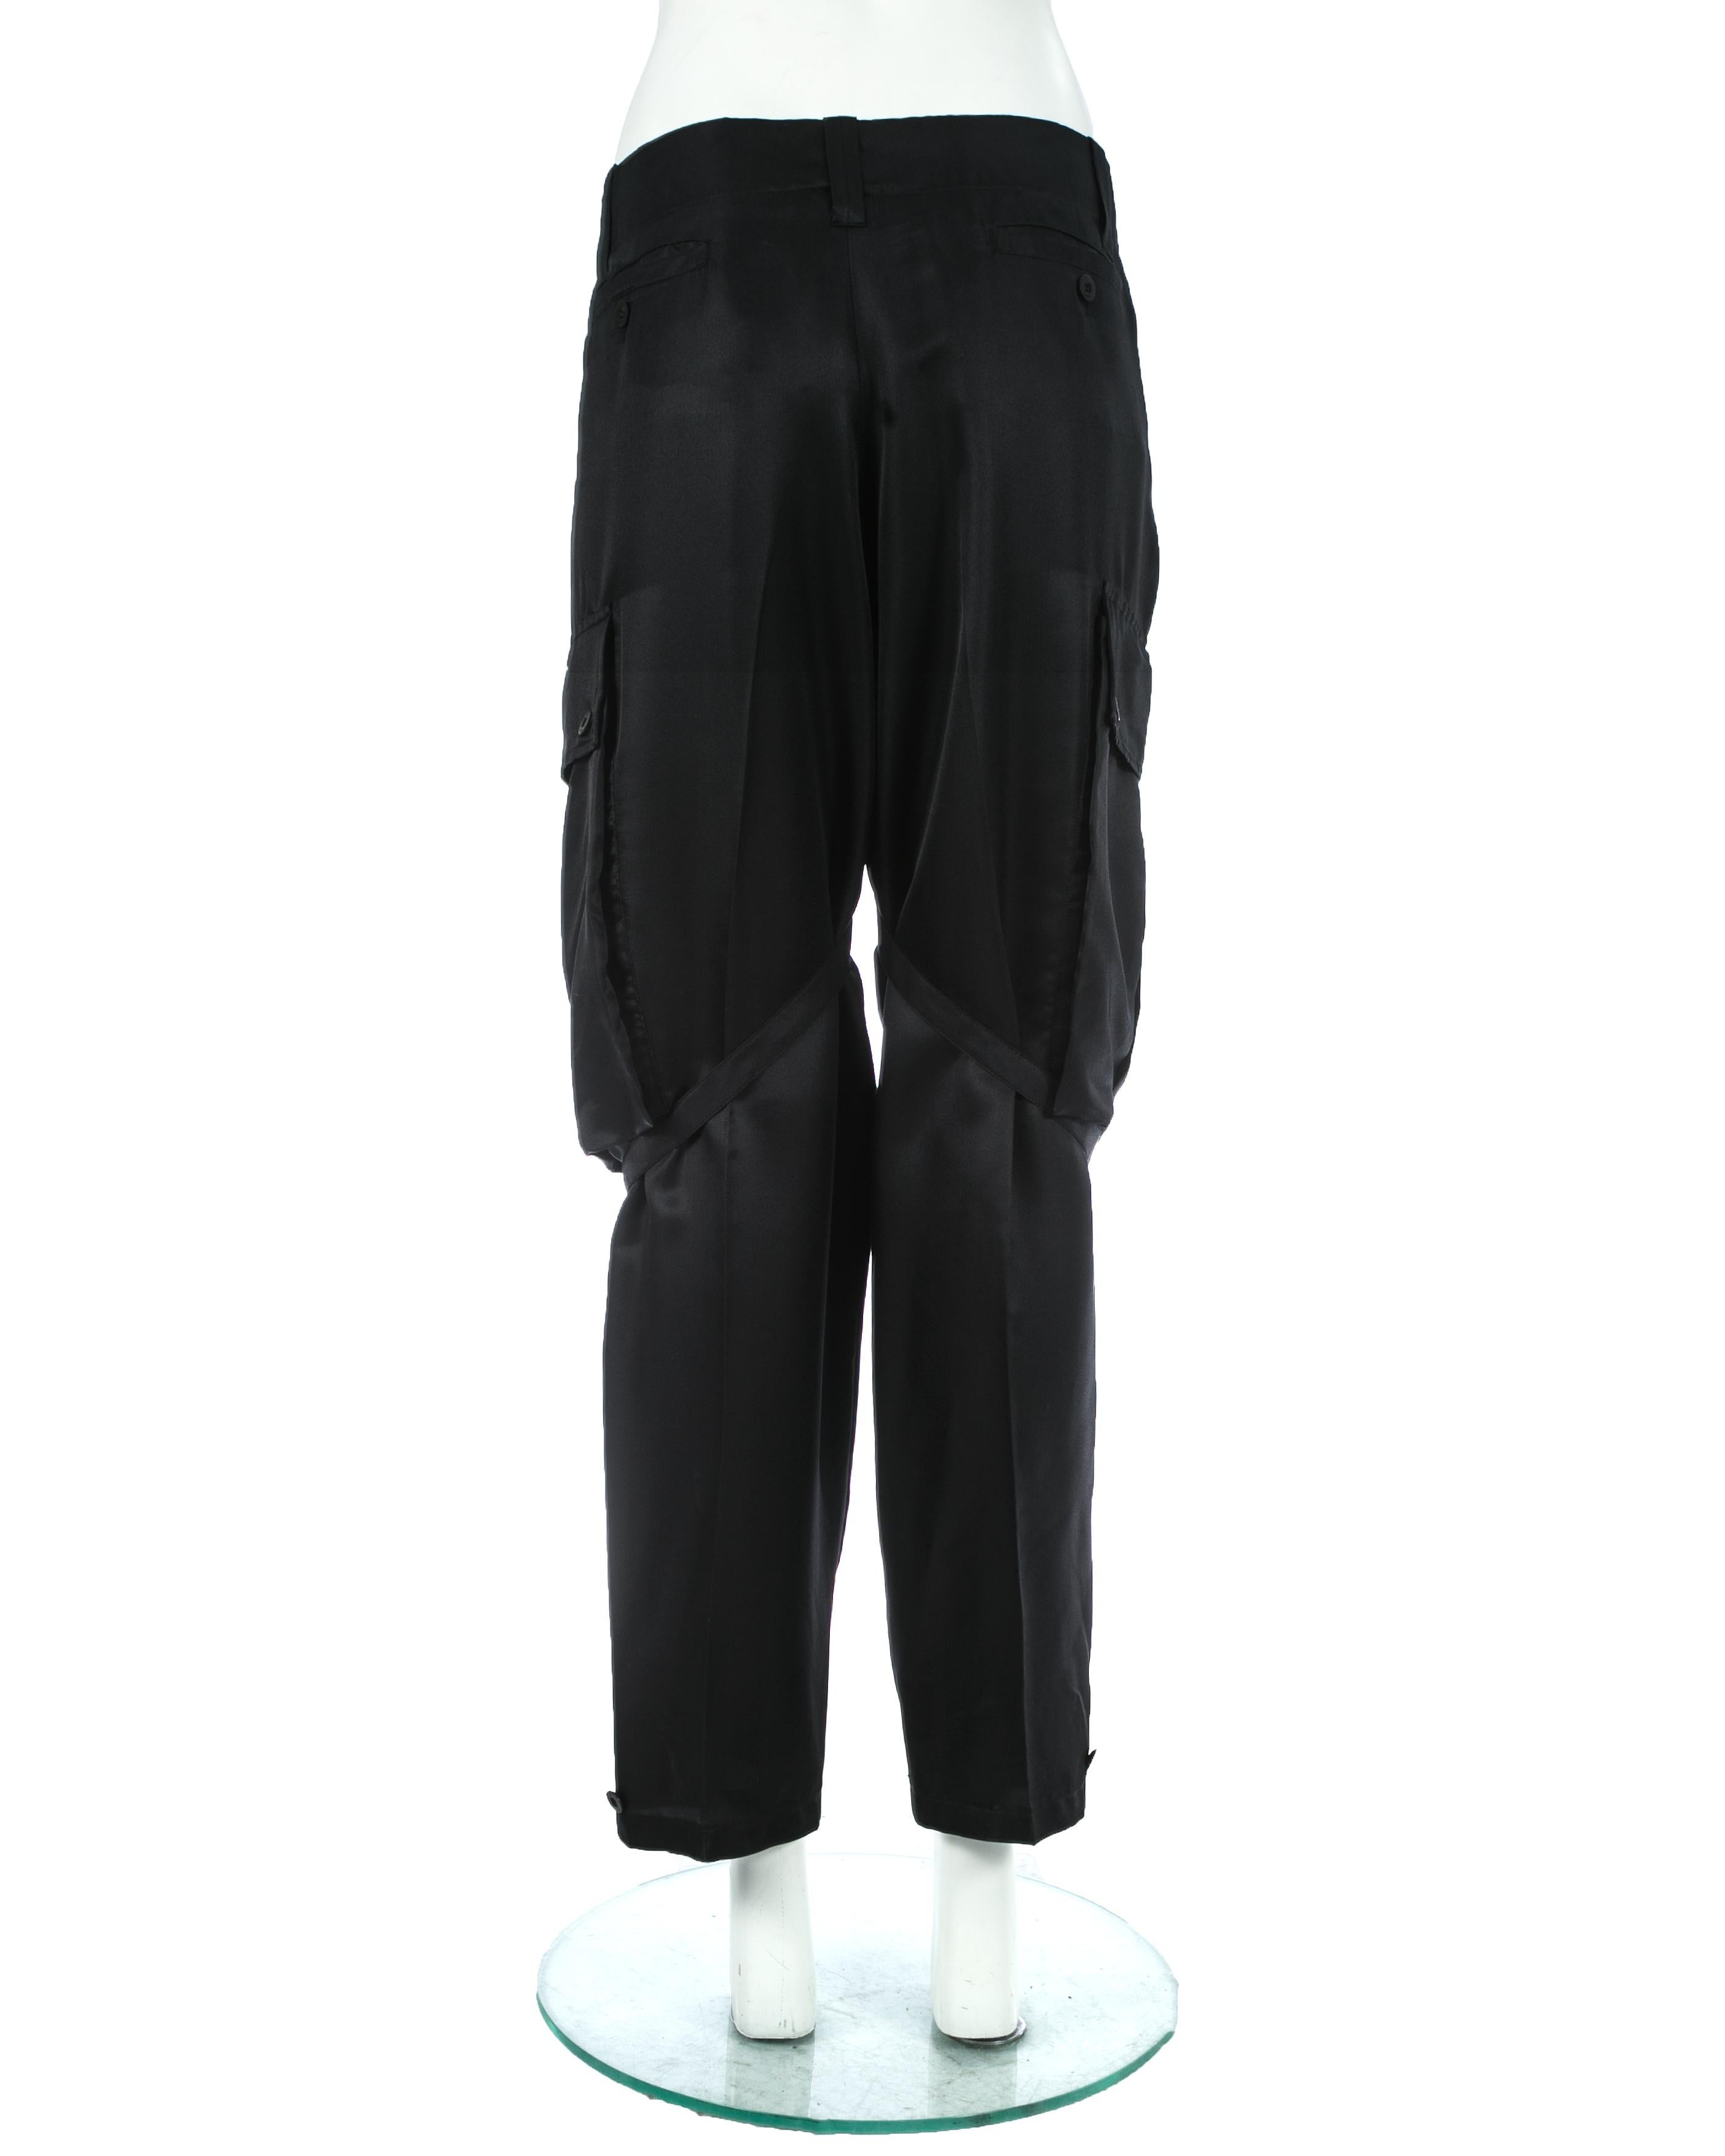 Gucci by Tom Ford black silk bondage cargo evening pants, ss 2001 1